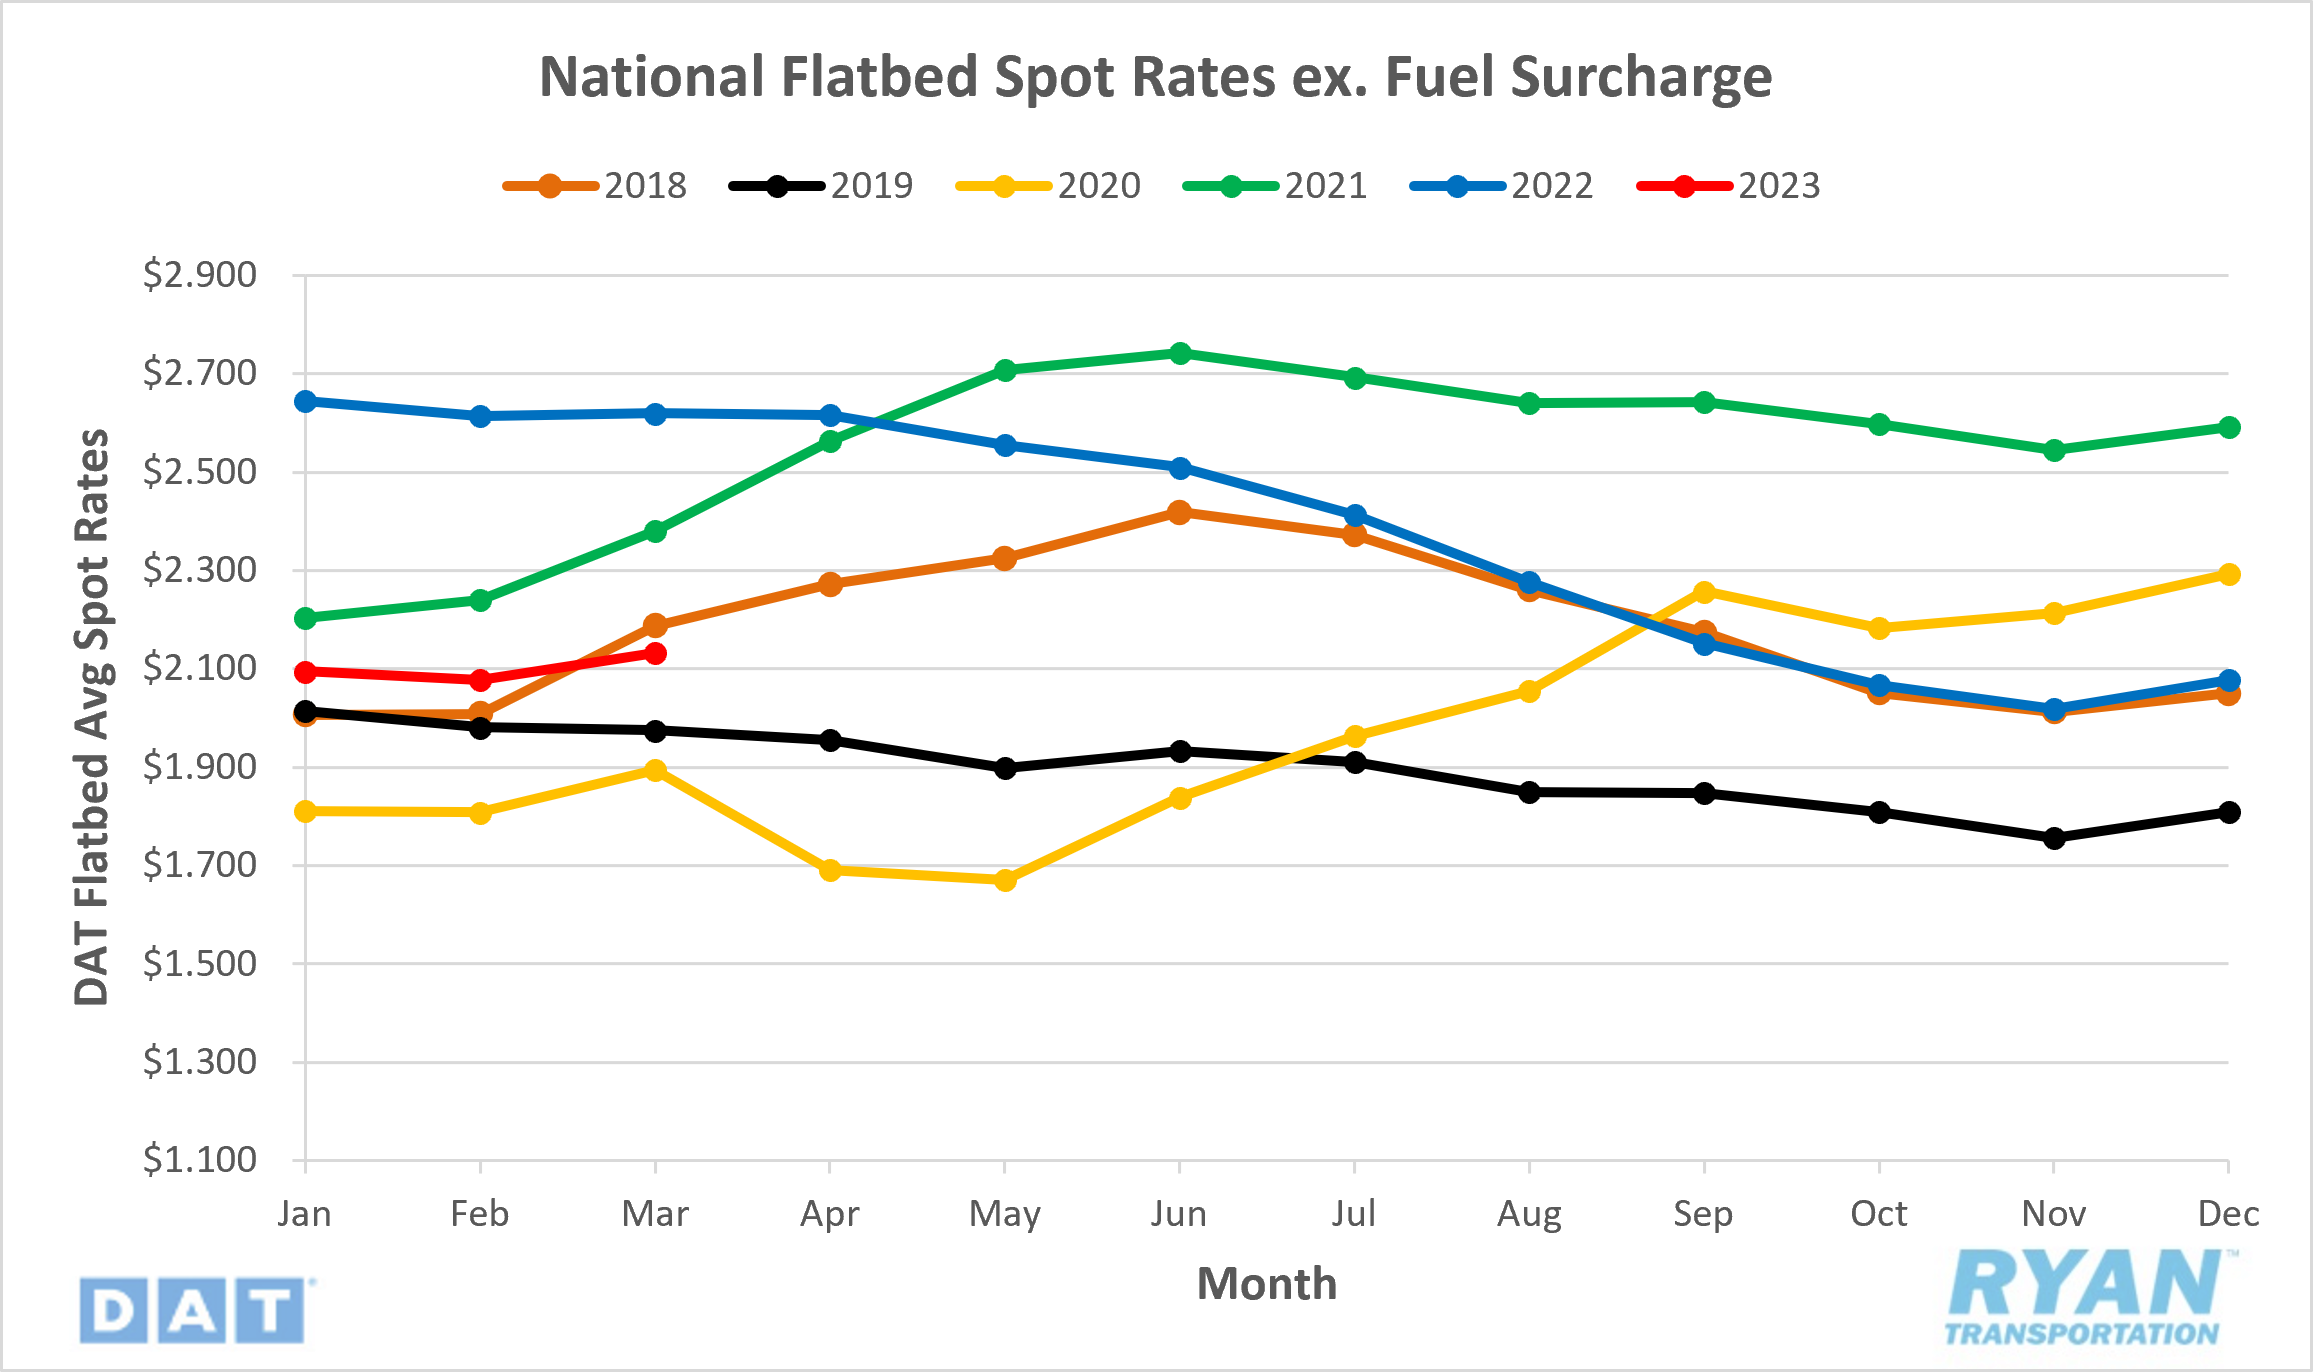 National Flatbed Spot Rates